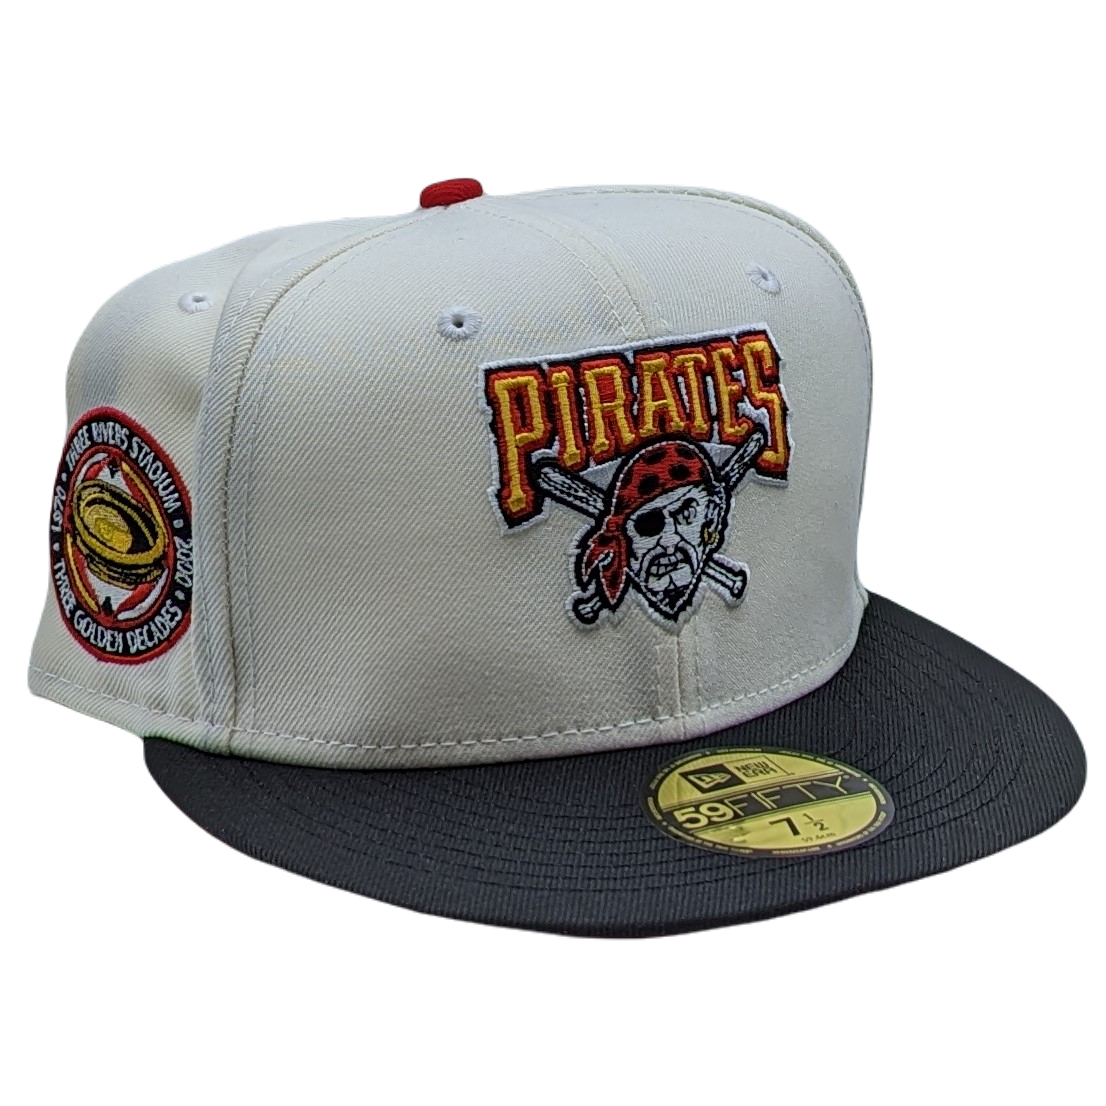 Official Pittsburgh Pirates Hats, Pirates Cap, Pirates Hats